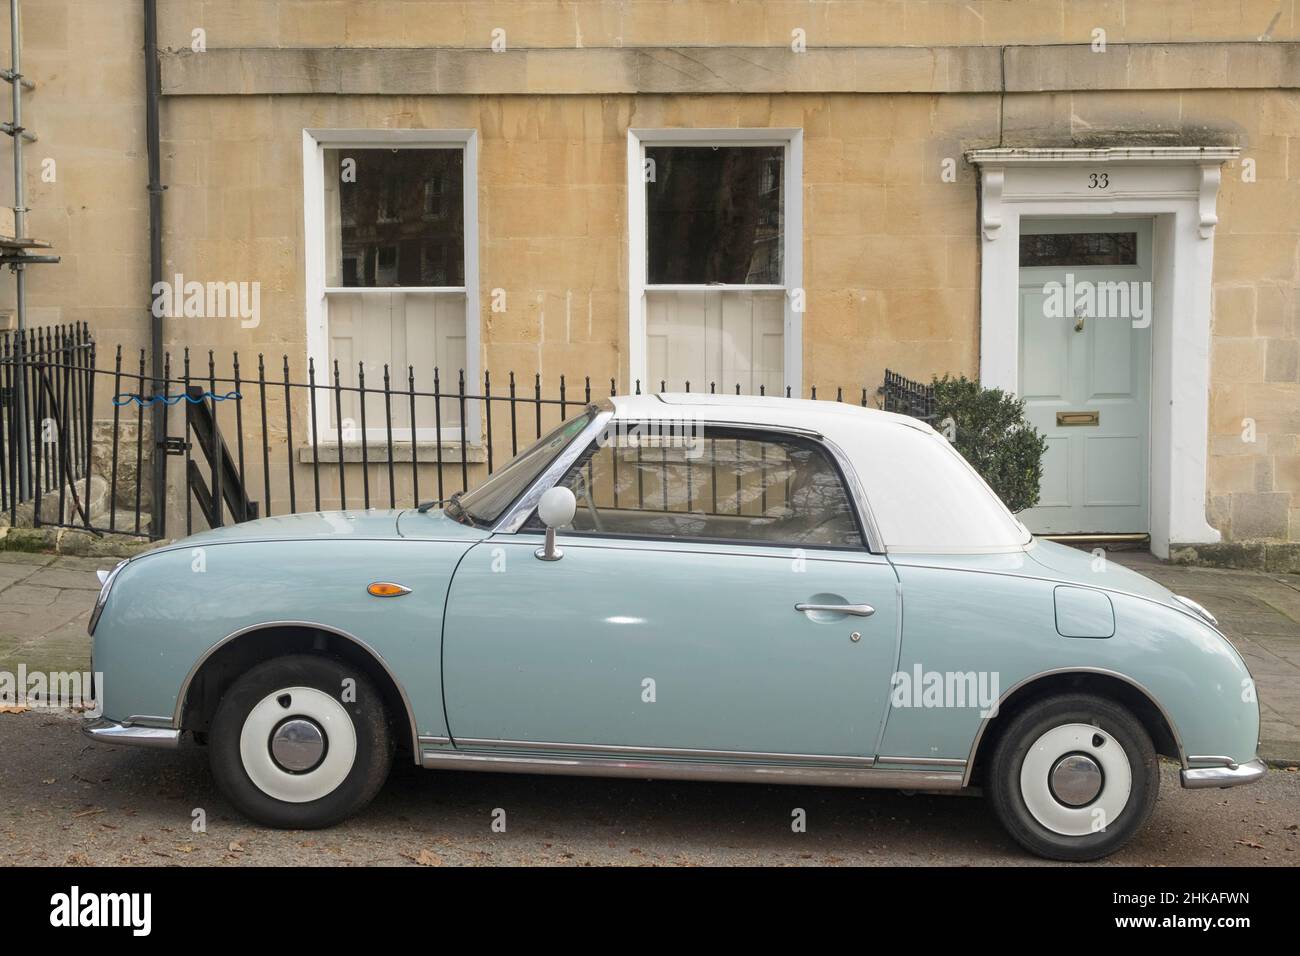 A blue (or pale aqua) 2004 model Nissan Figaro, two door convertible. Stock Photo